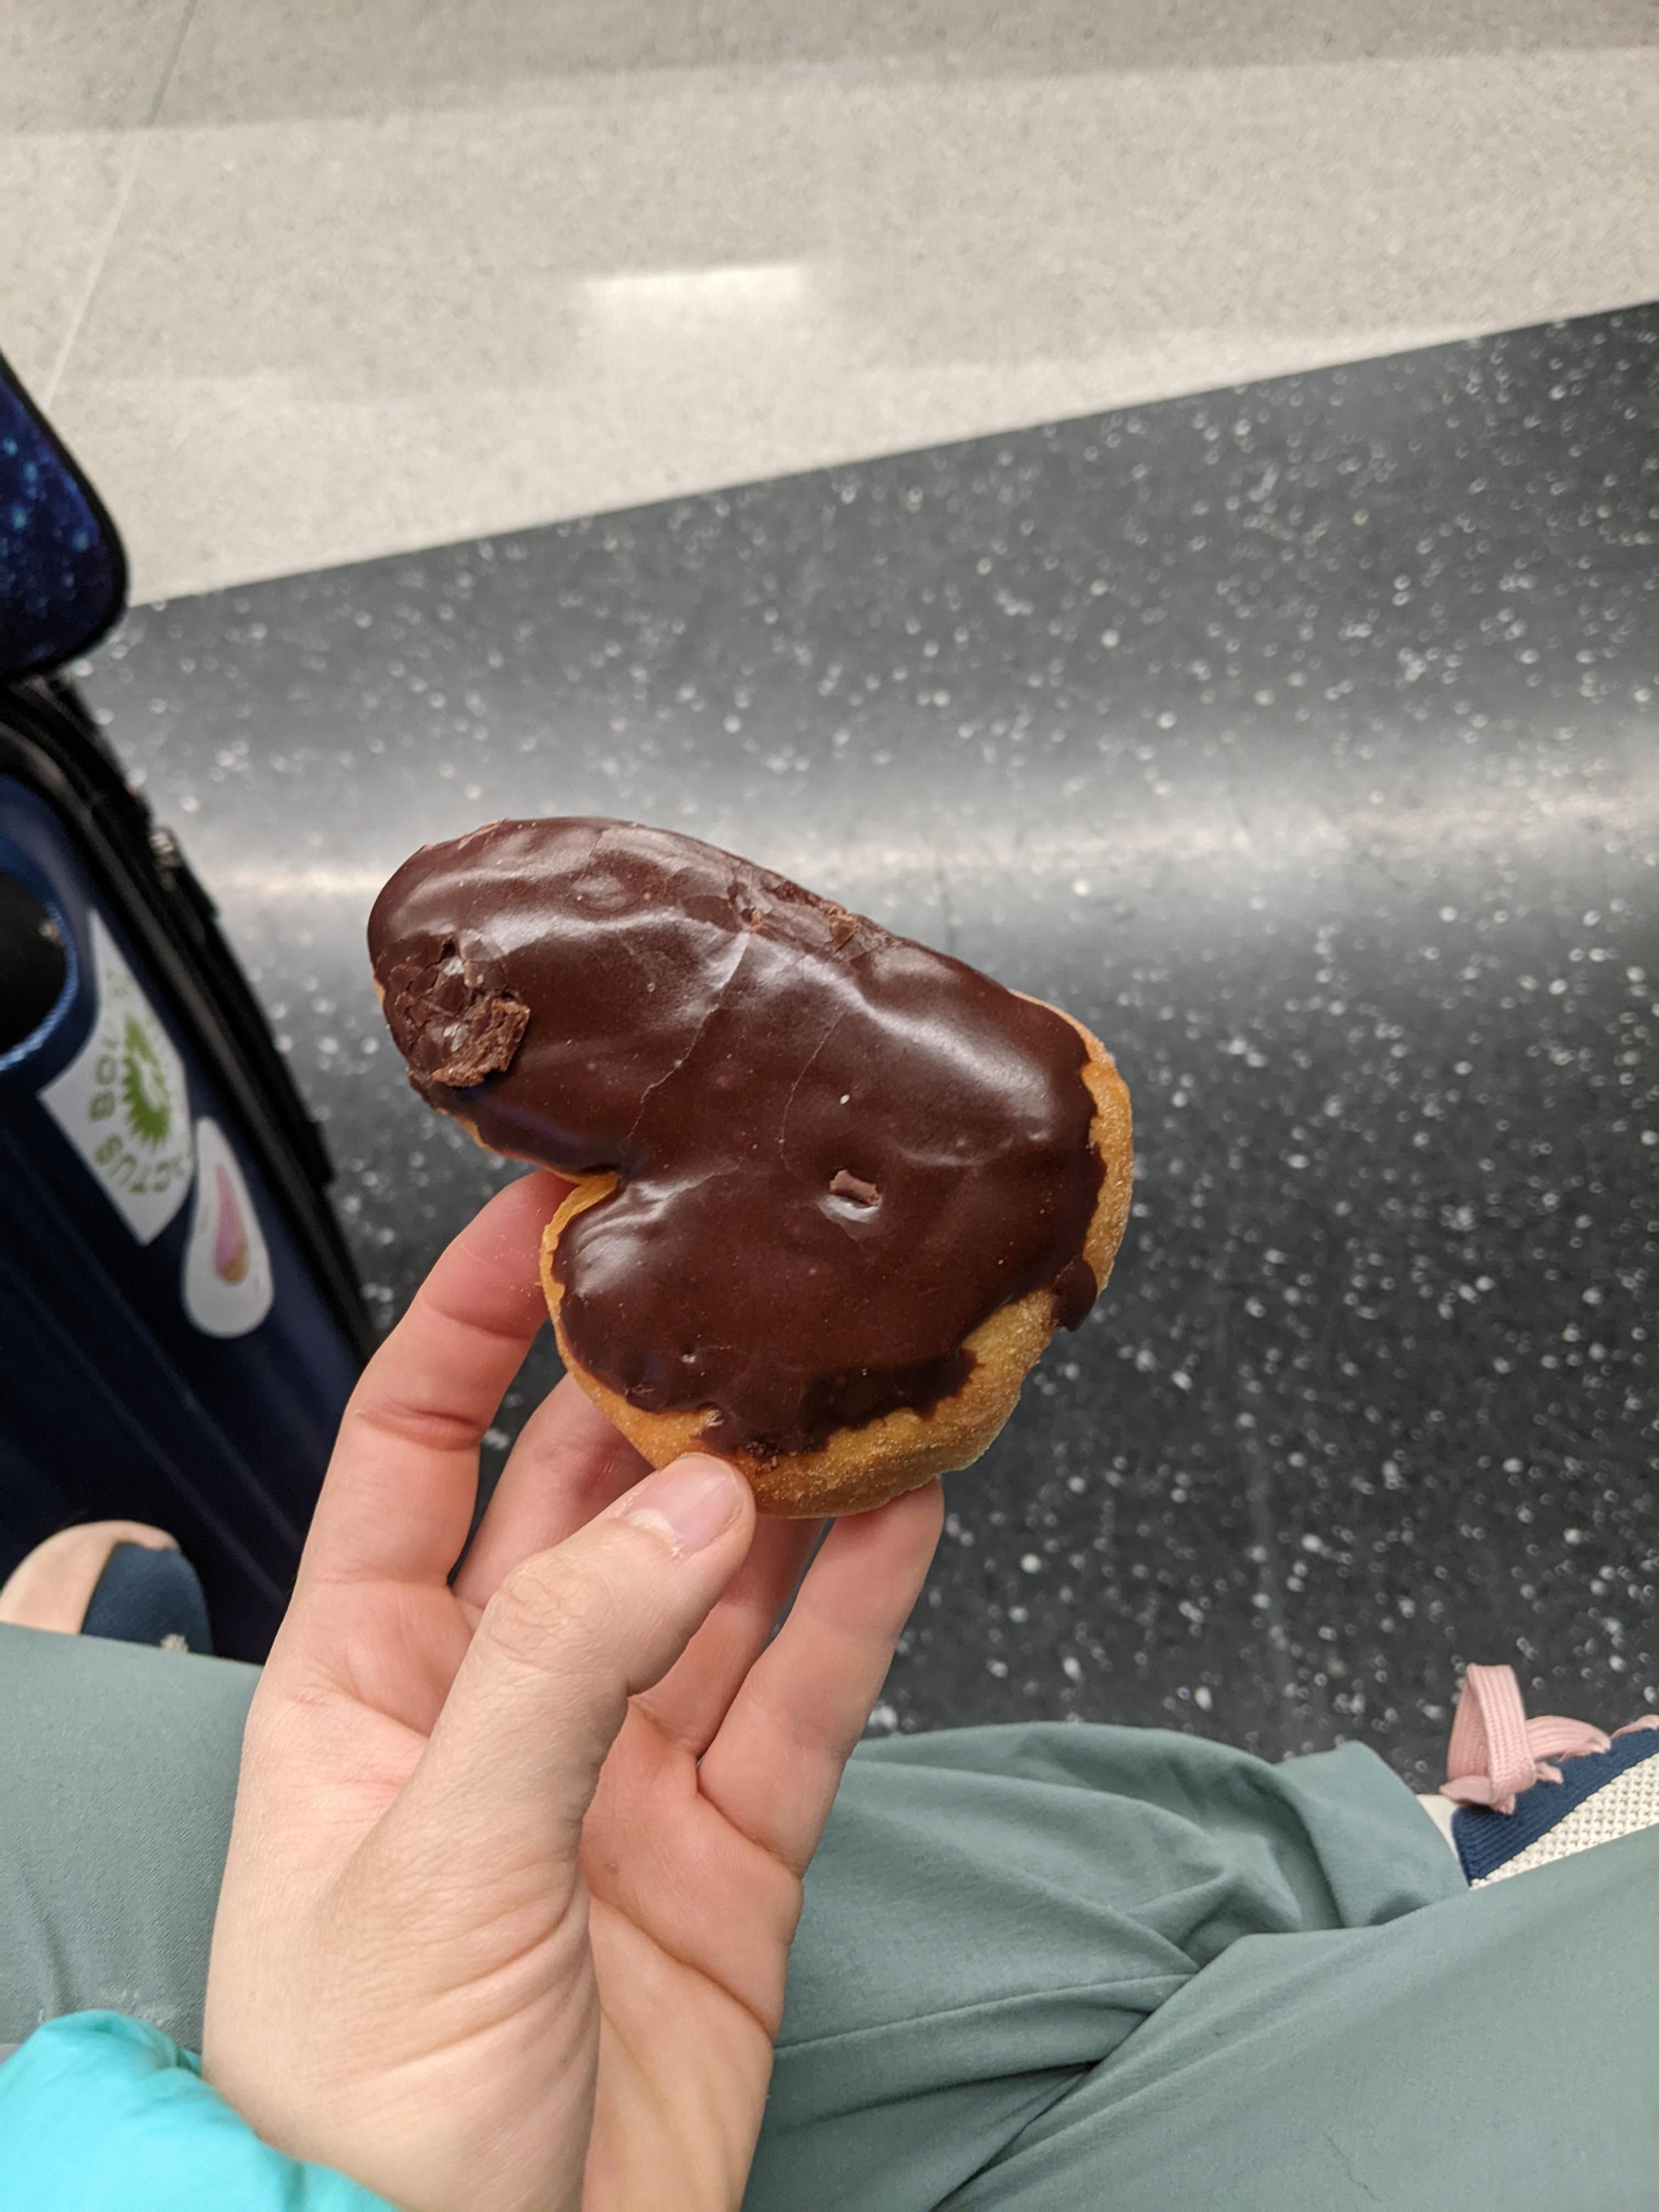 There are no Dunkins where I live, so while visiting my home state I got a Boston Kreme, that came out like this...